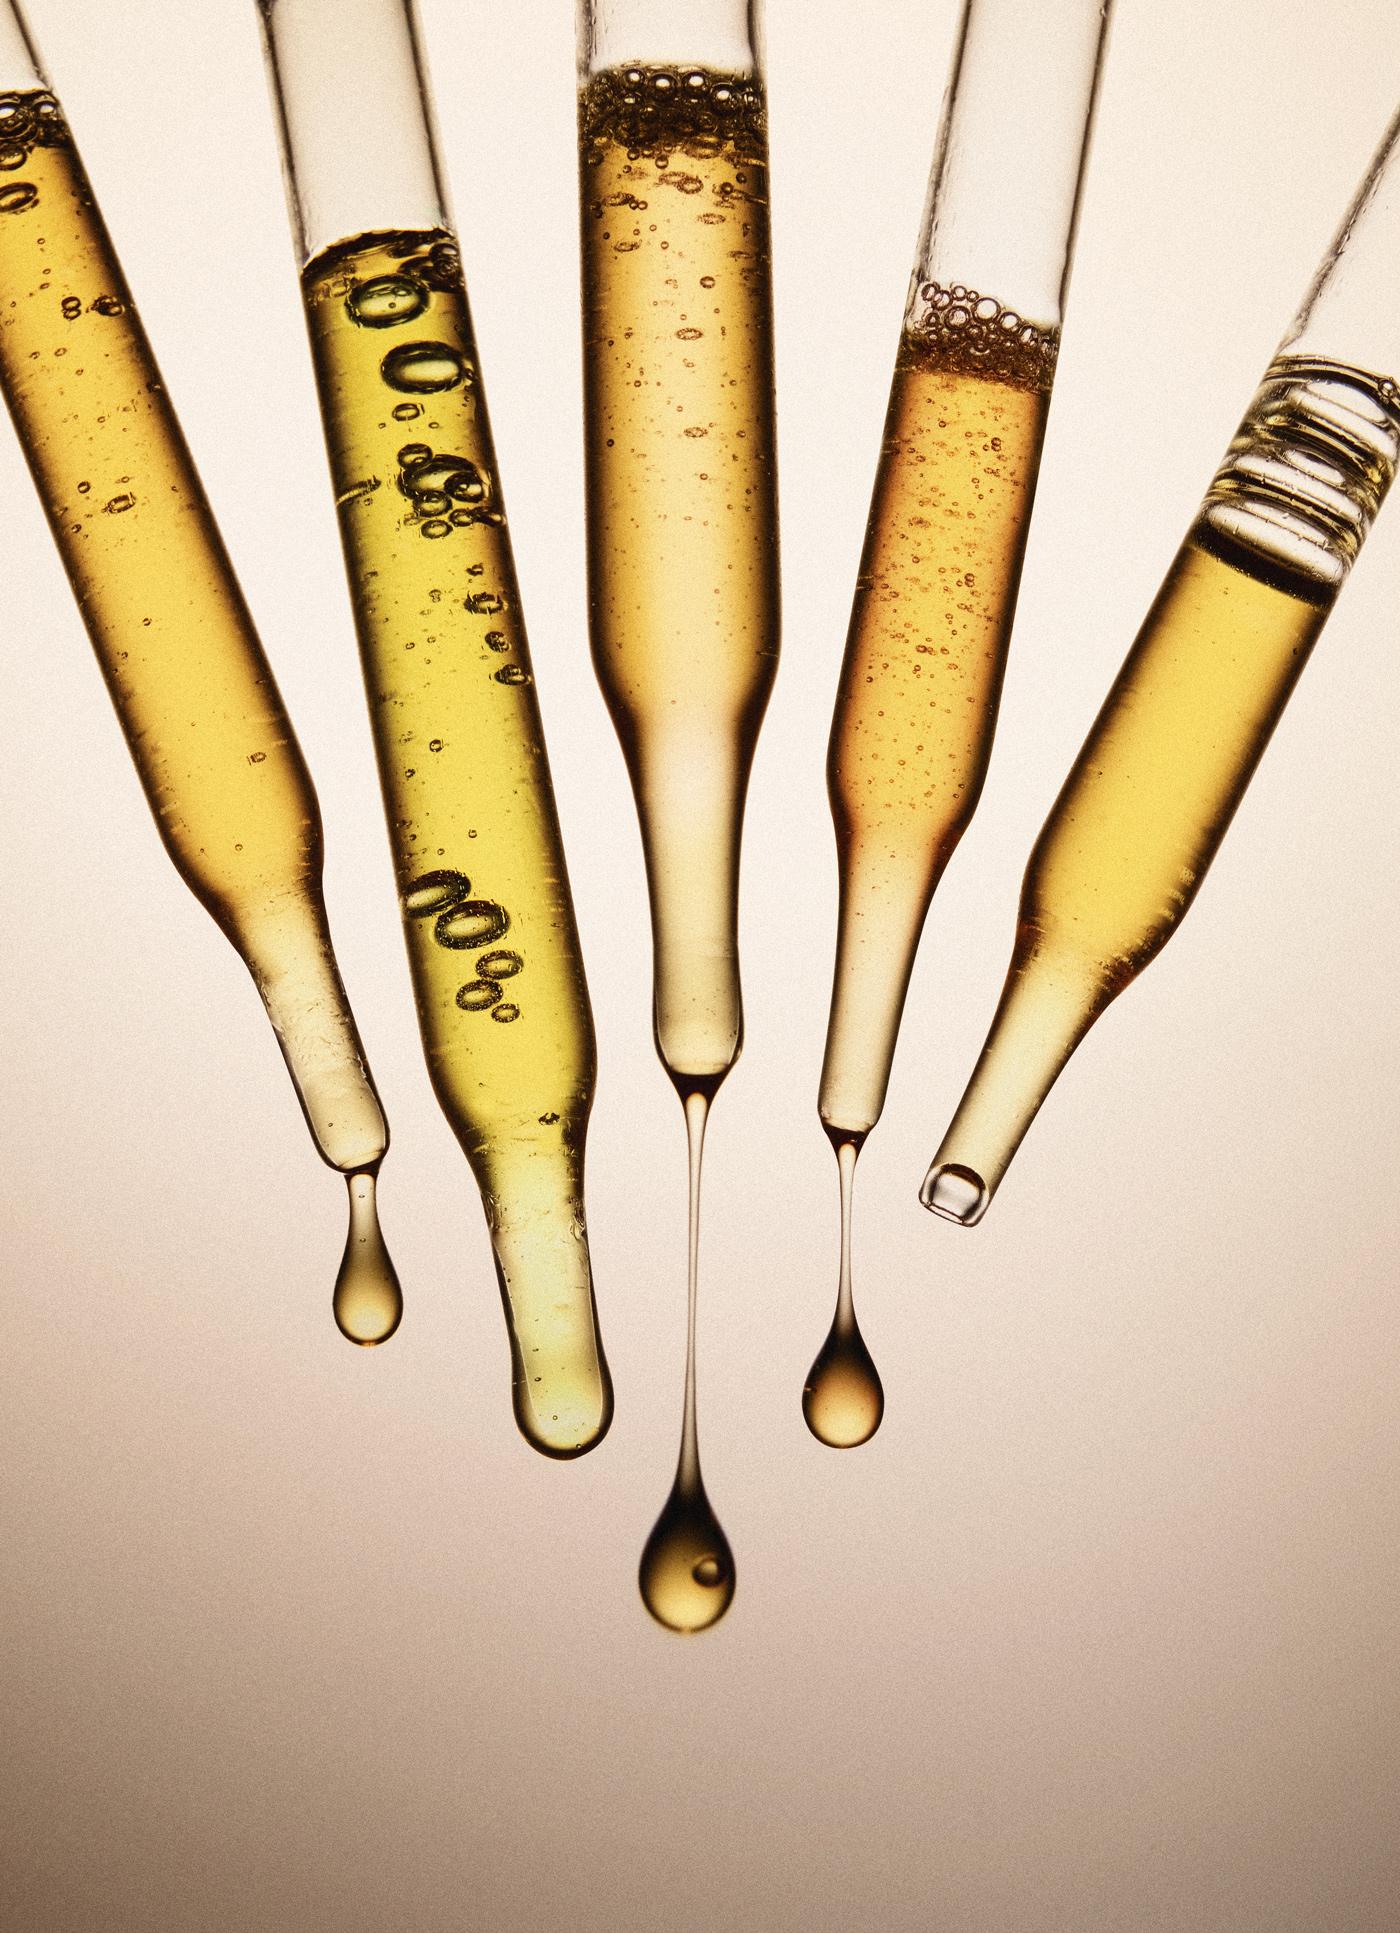 Ampoules with oil